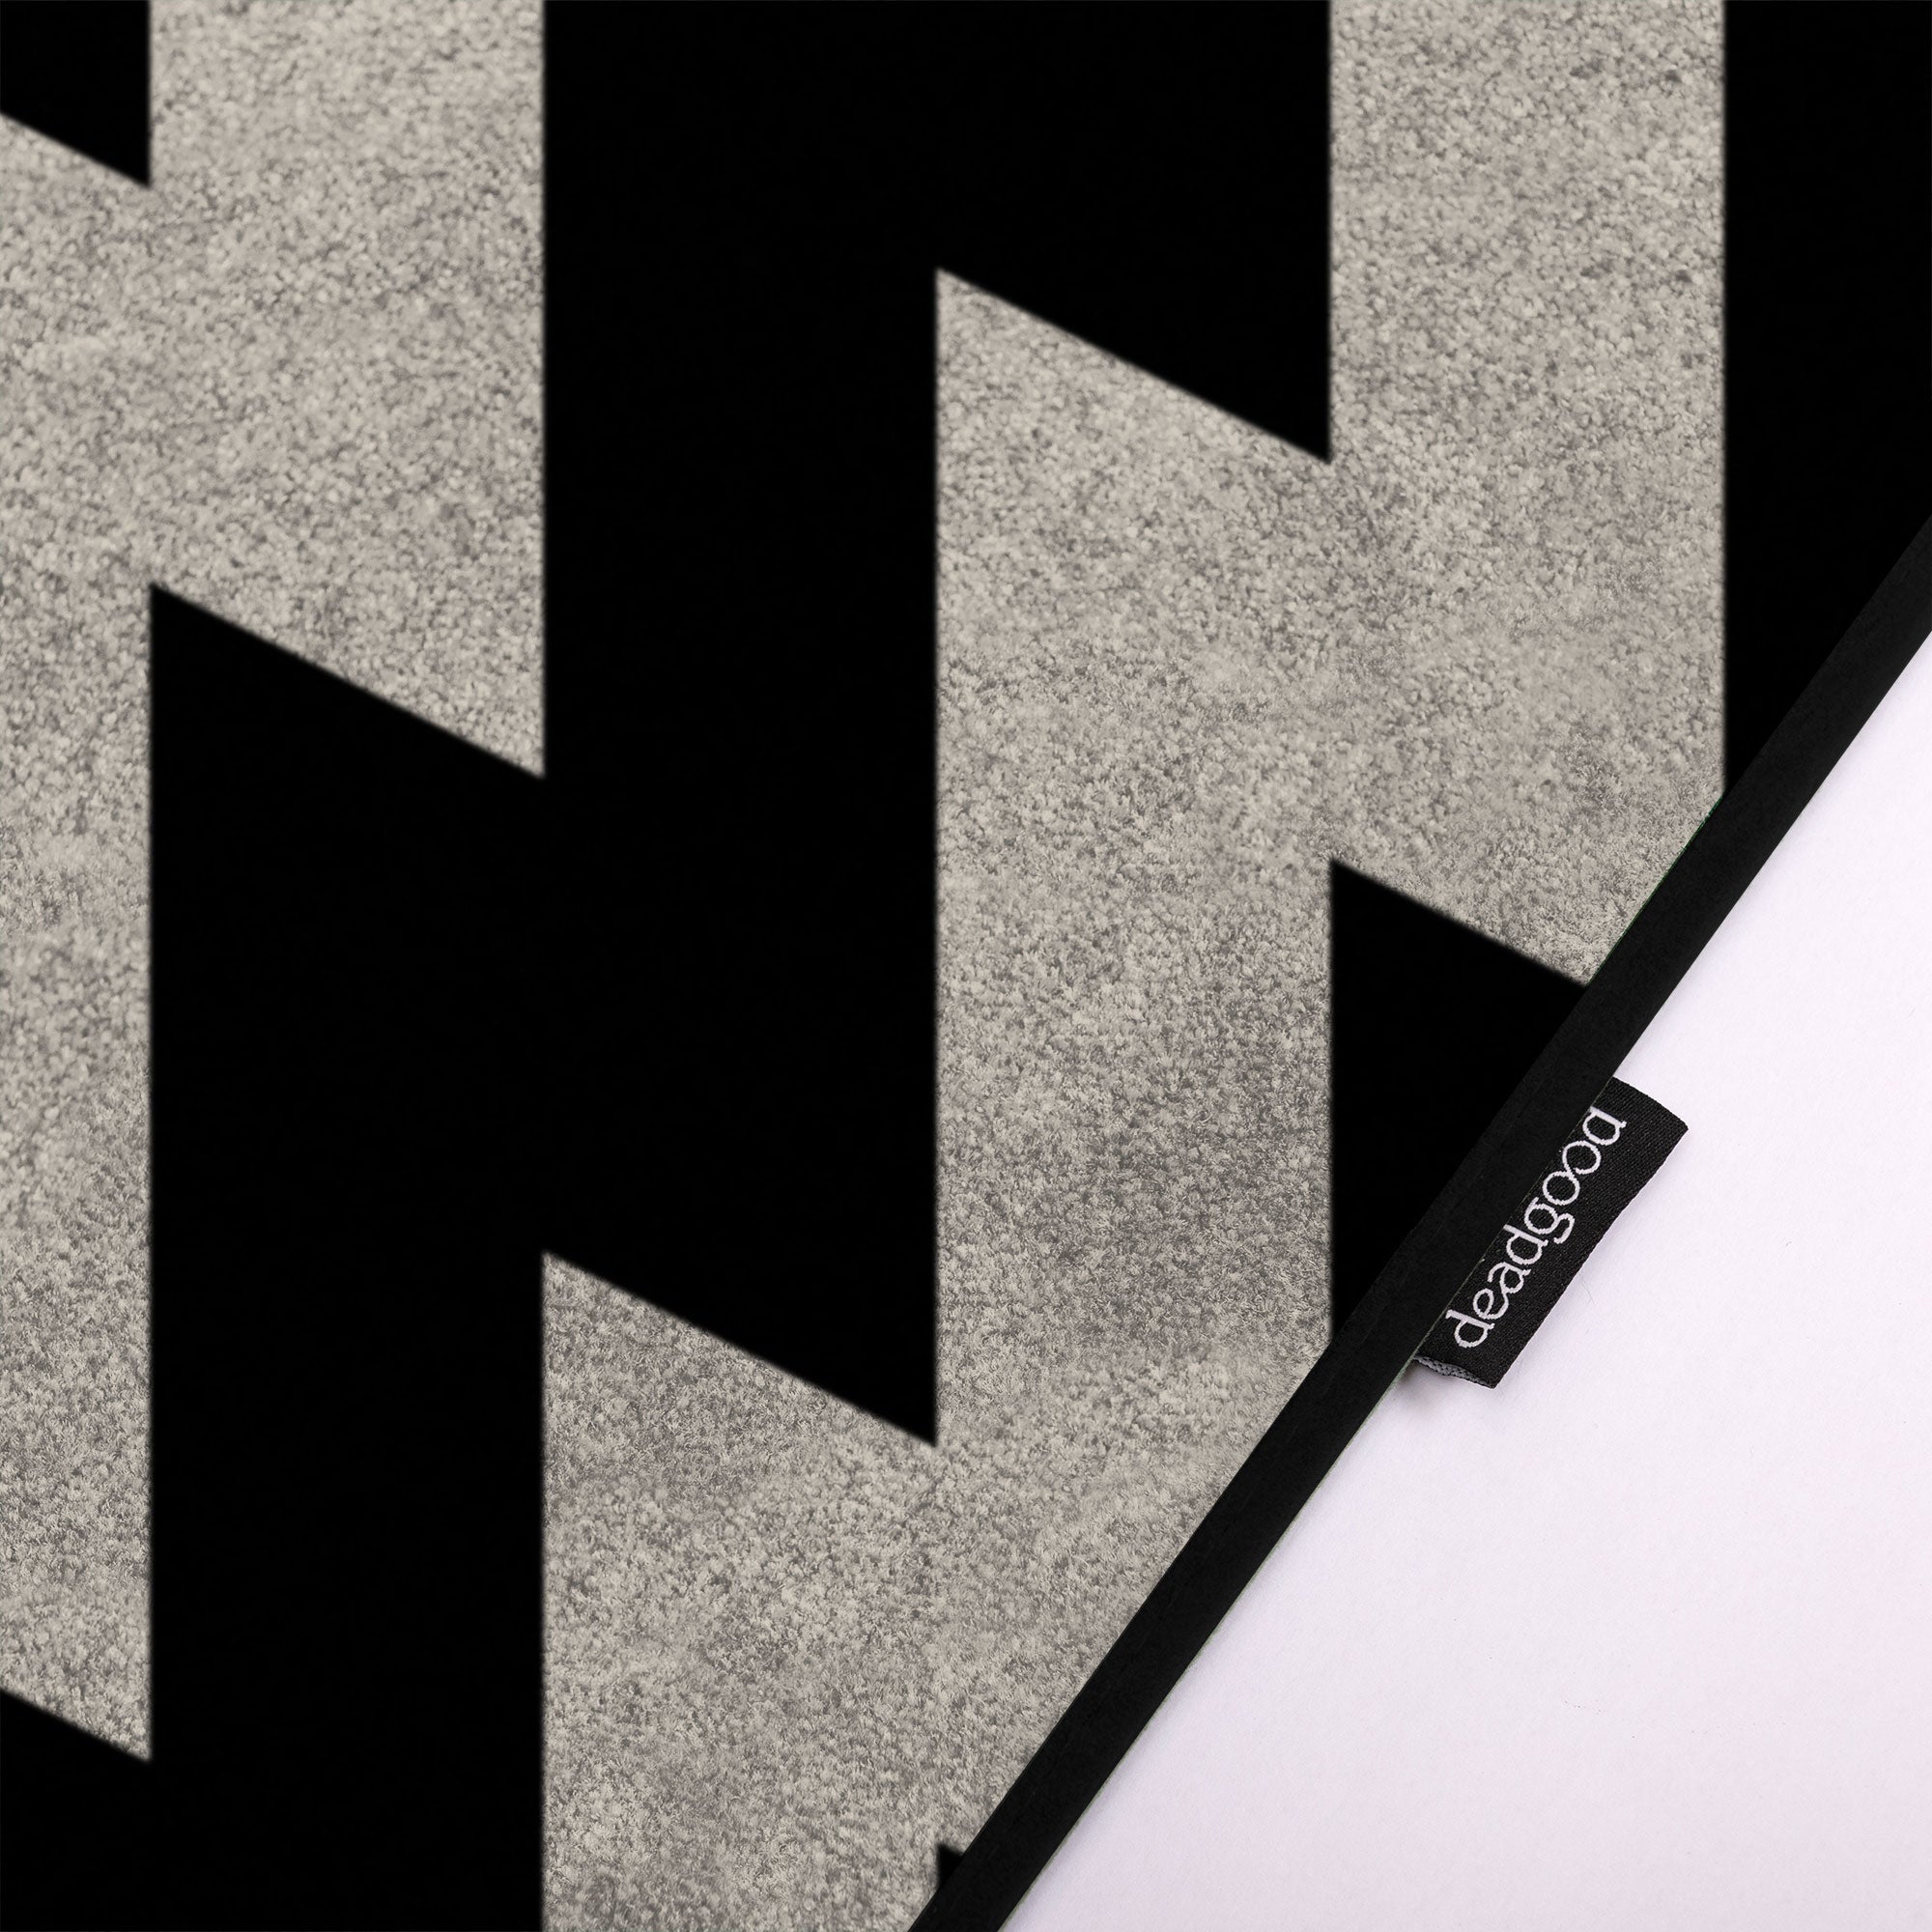 Detail of a Black and White Geometric patterned rug for innovative coworking spaces